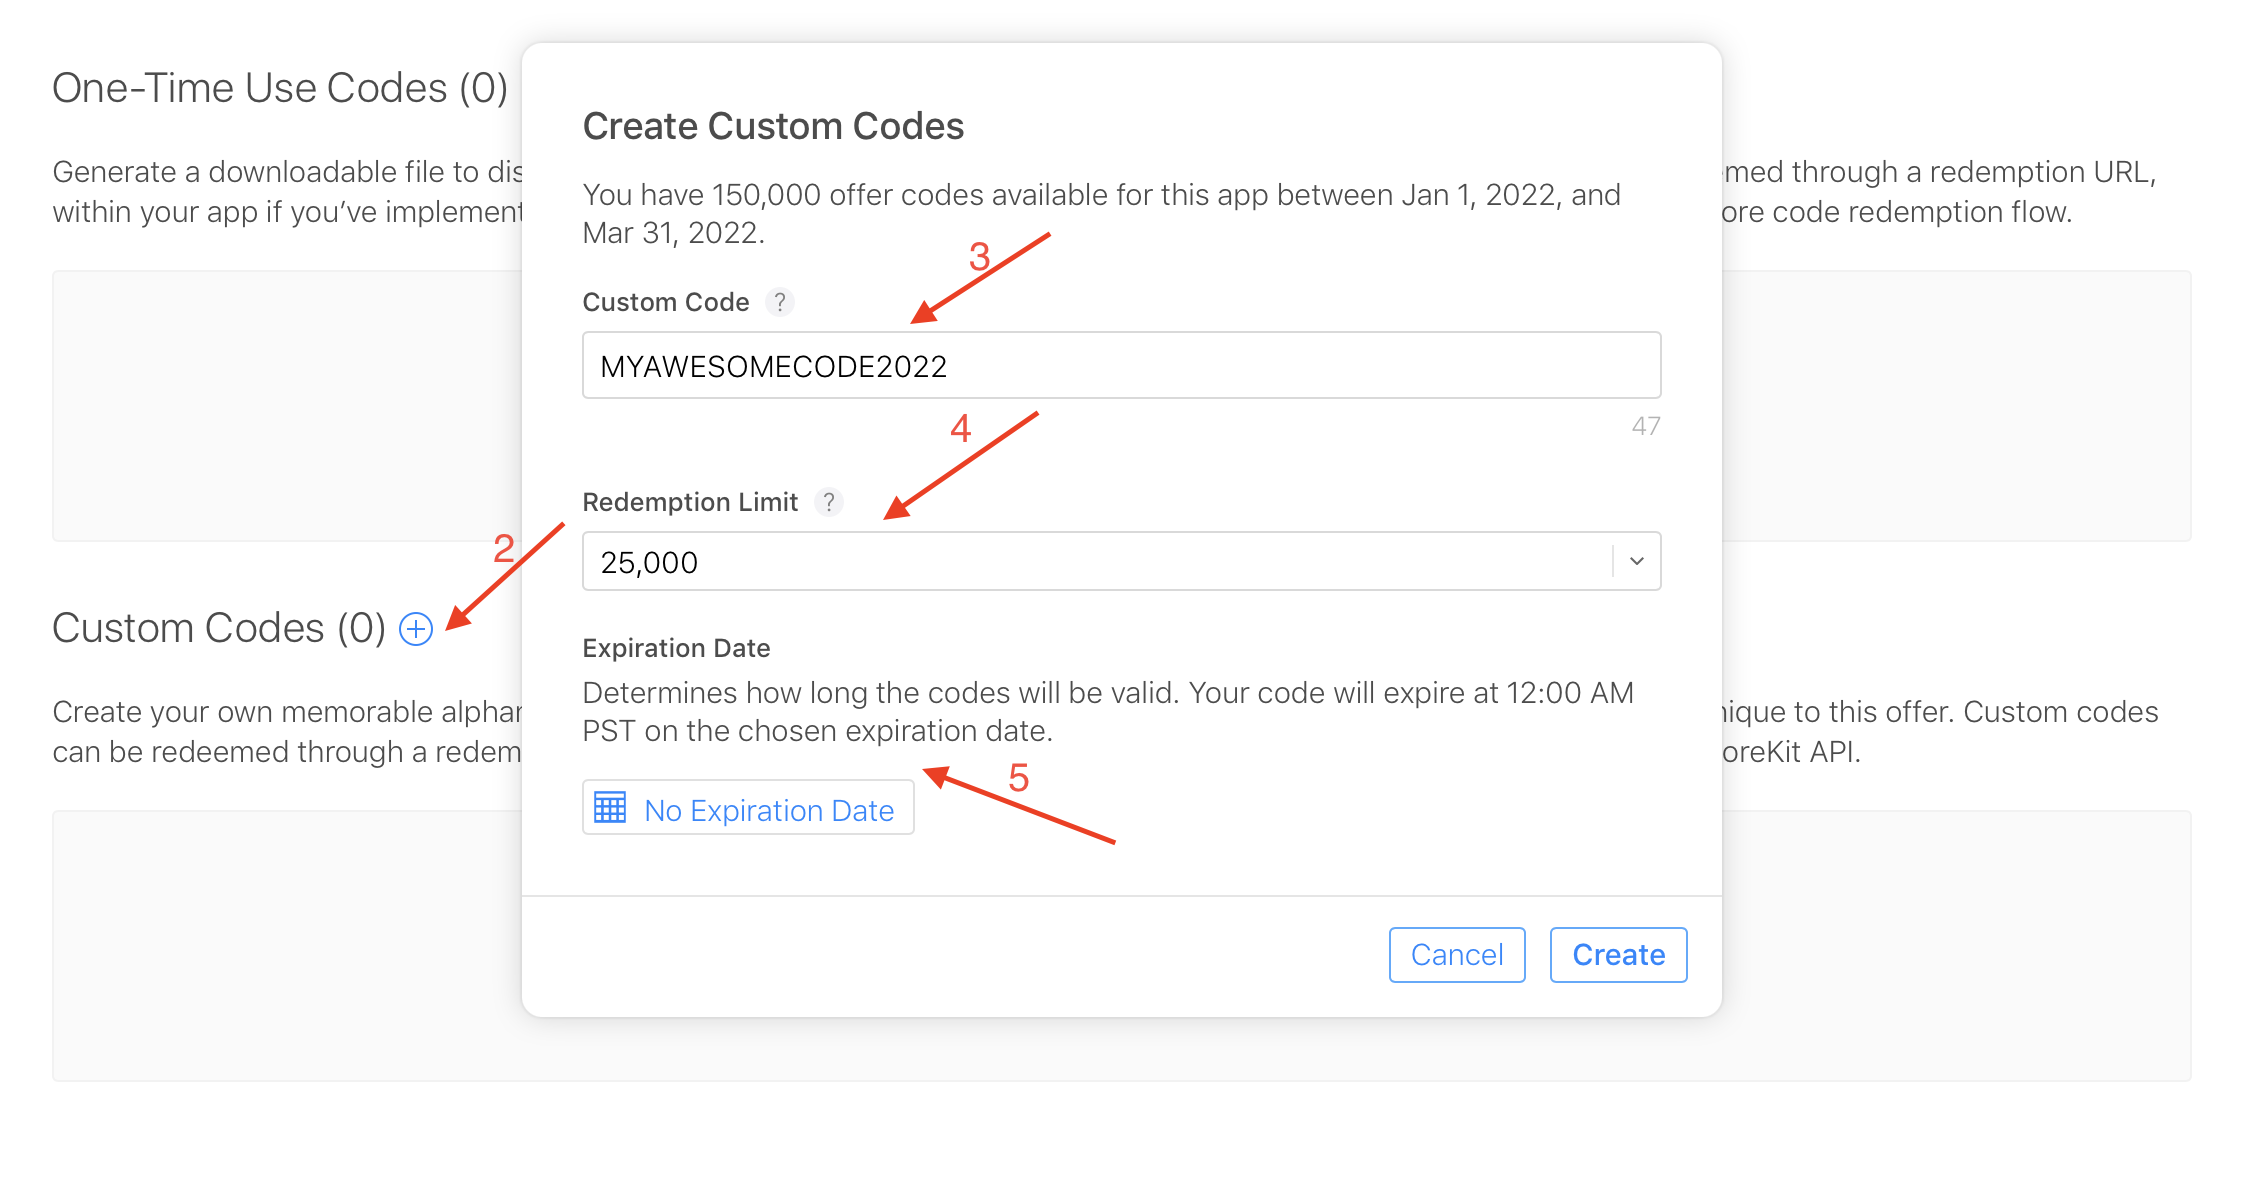 Developers Now Able to Provide Promo Codes for In-App Purchases - MacRumors